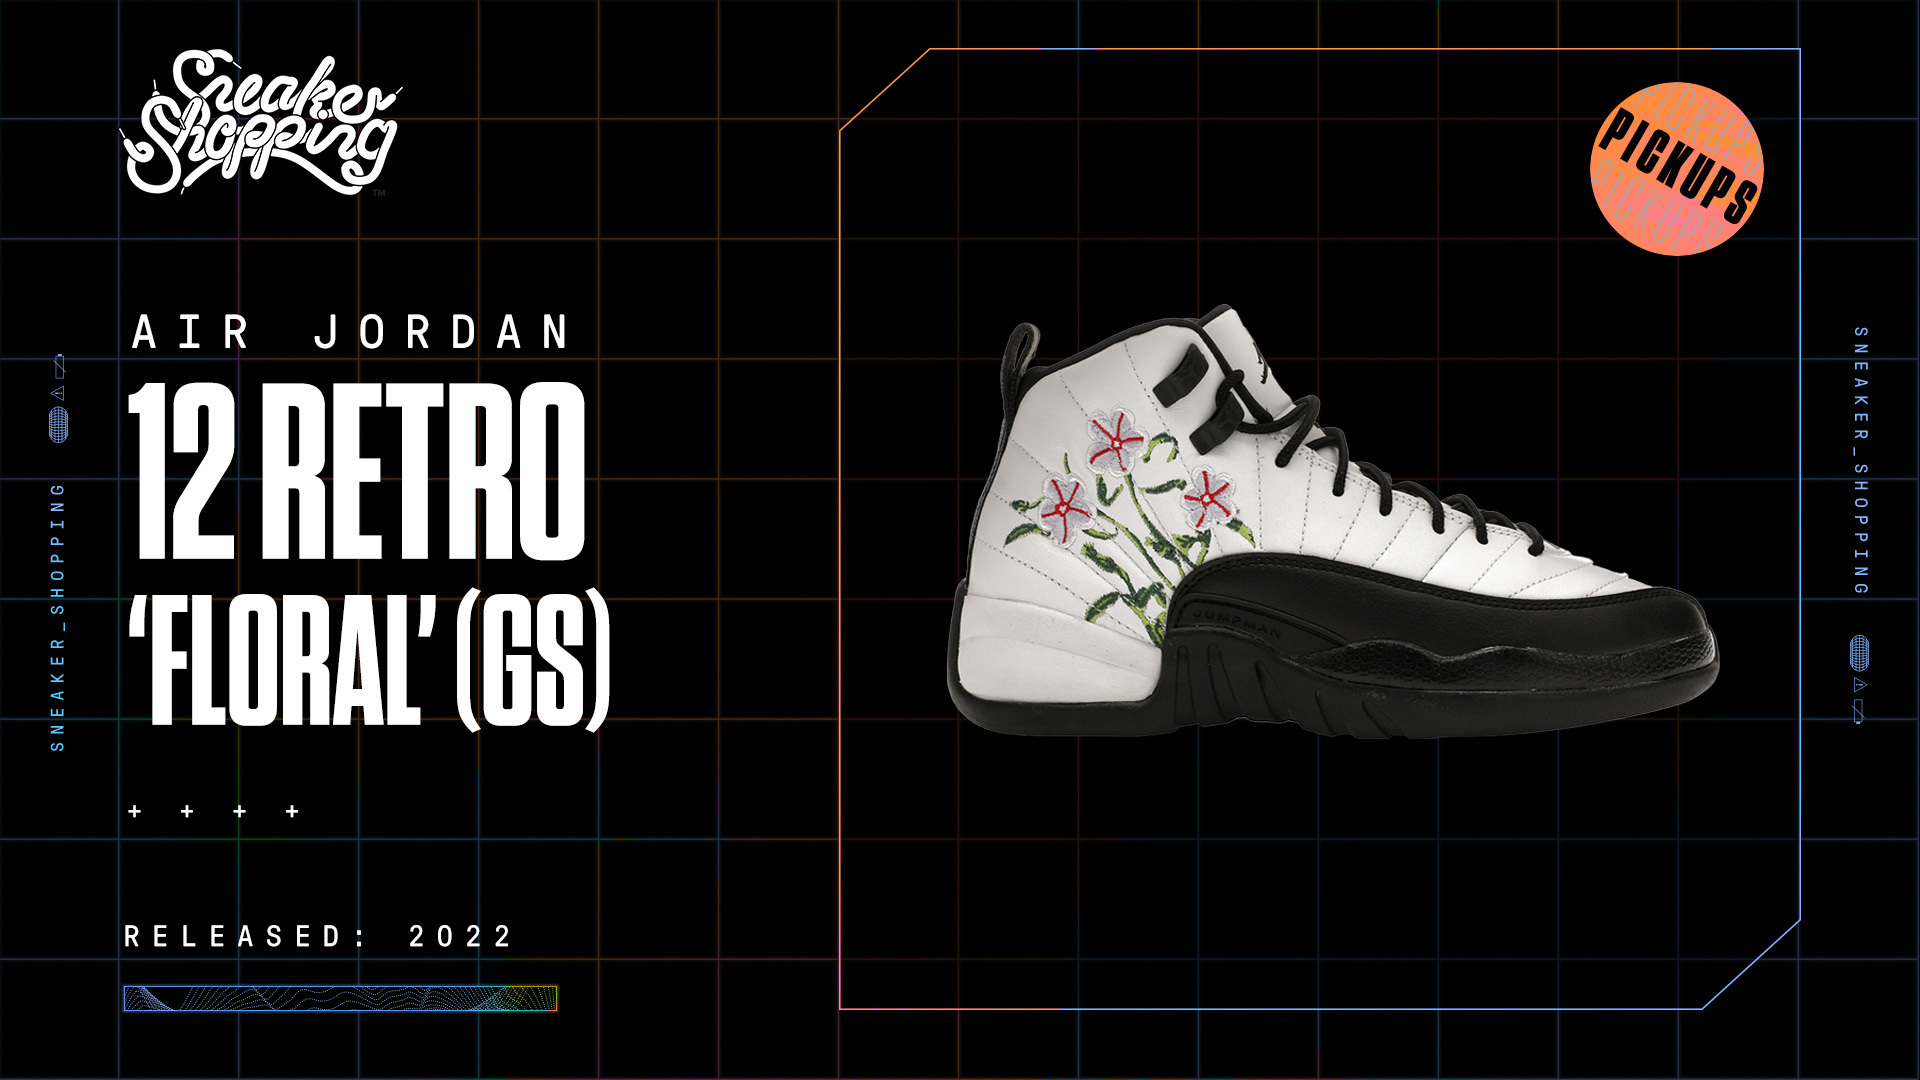 Image of a white Nike Air Jordan 12 Retro &#x27;Floral&#x27; (GS) sneaker with floral embroidery on the sides. Released in 2022. Black grid background with &quot;Sneaker Shopping&quot; logo